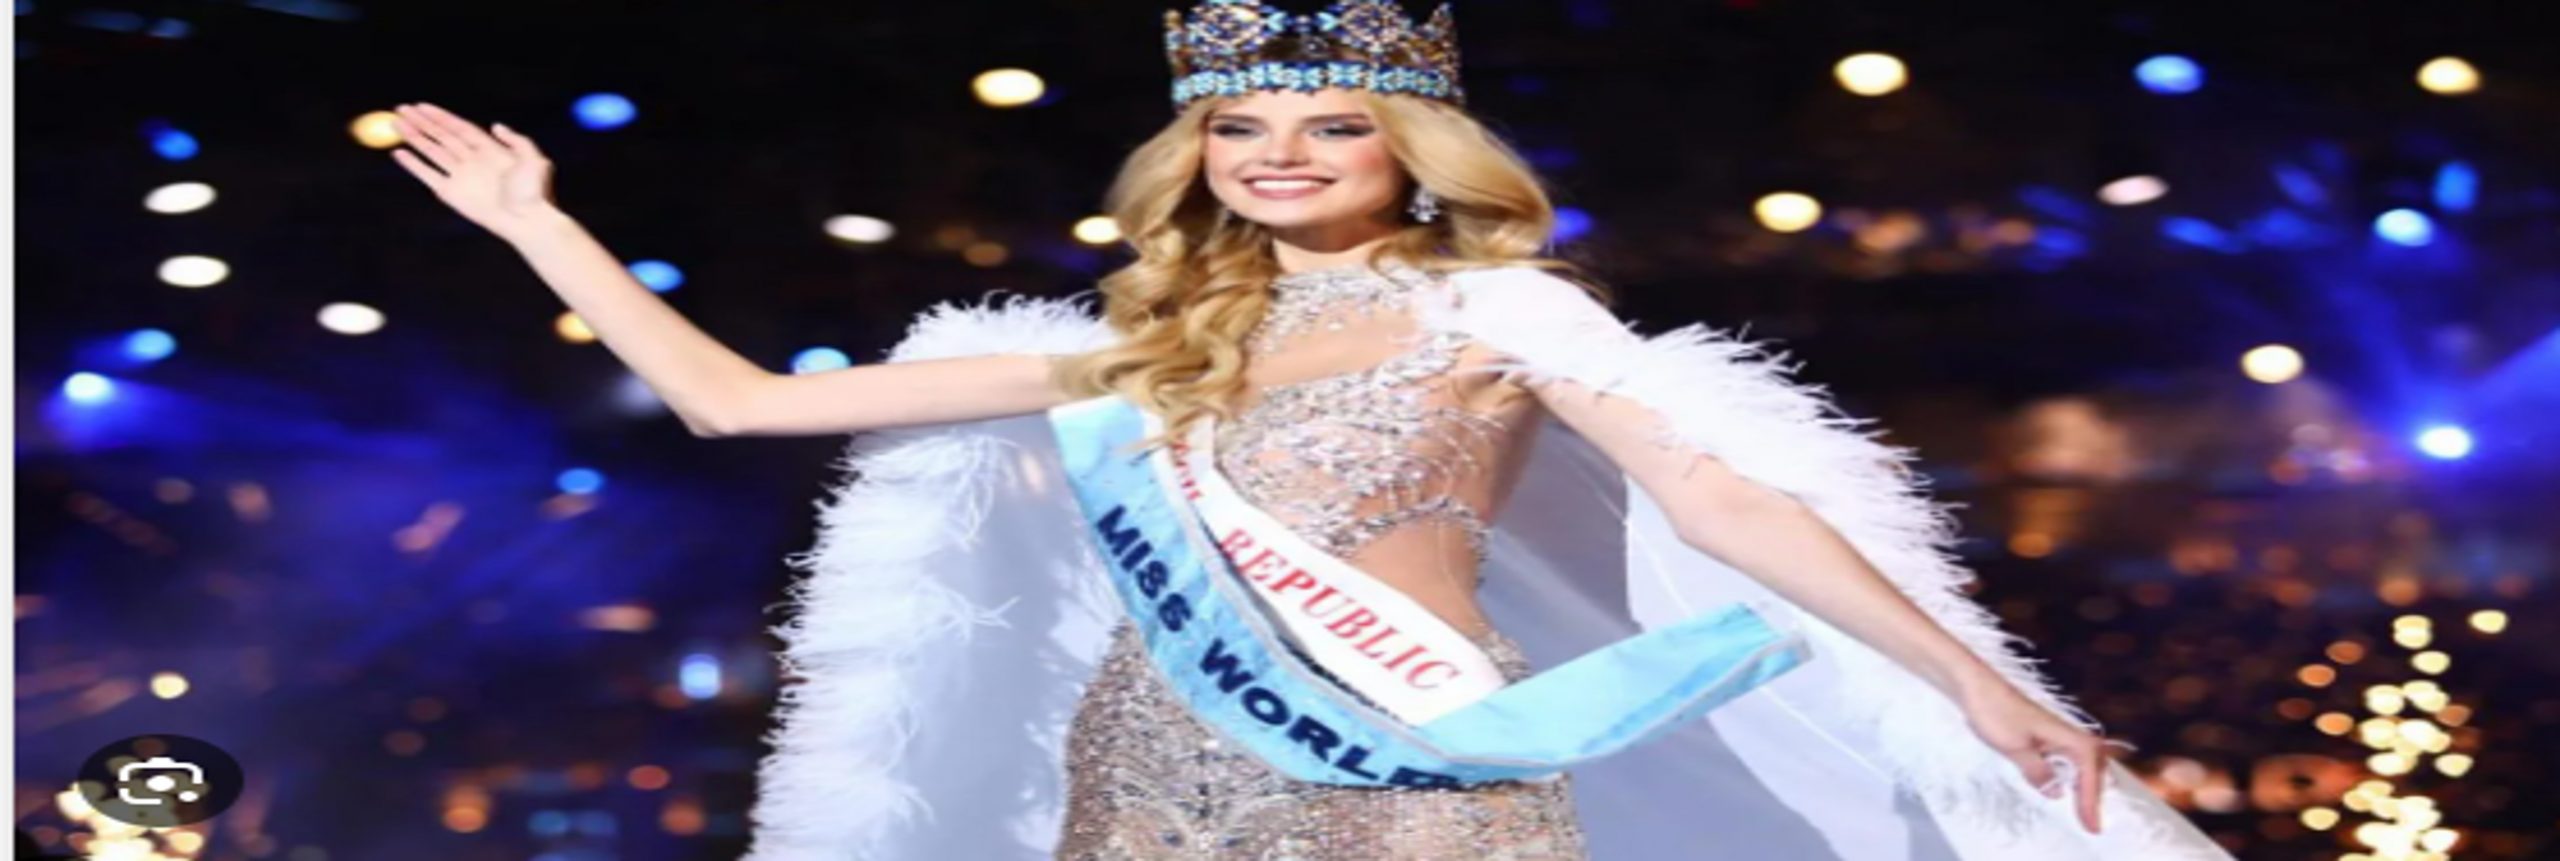 From law student to beauty queen: Krystyna Pyszkova crowned ‘Miss World 2024’